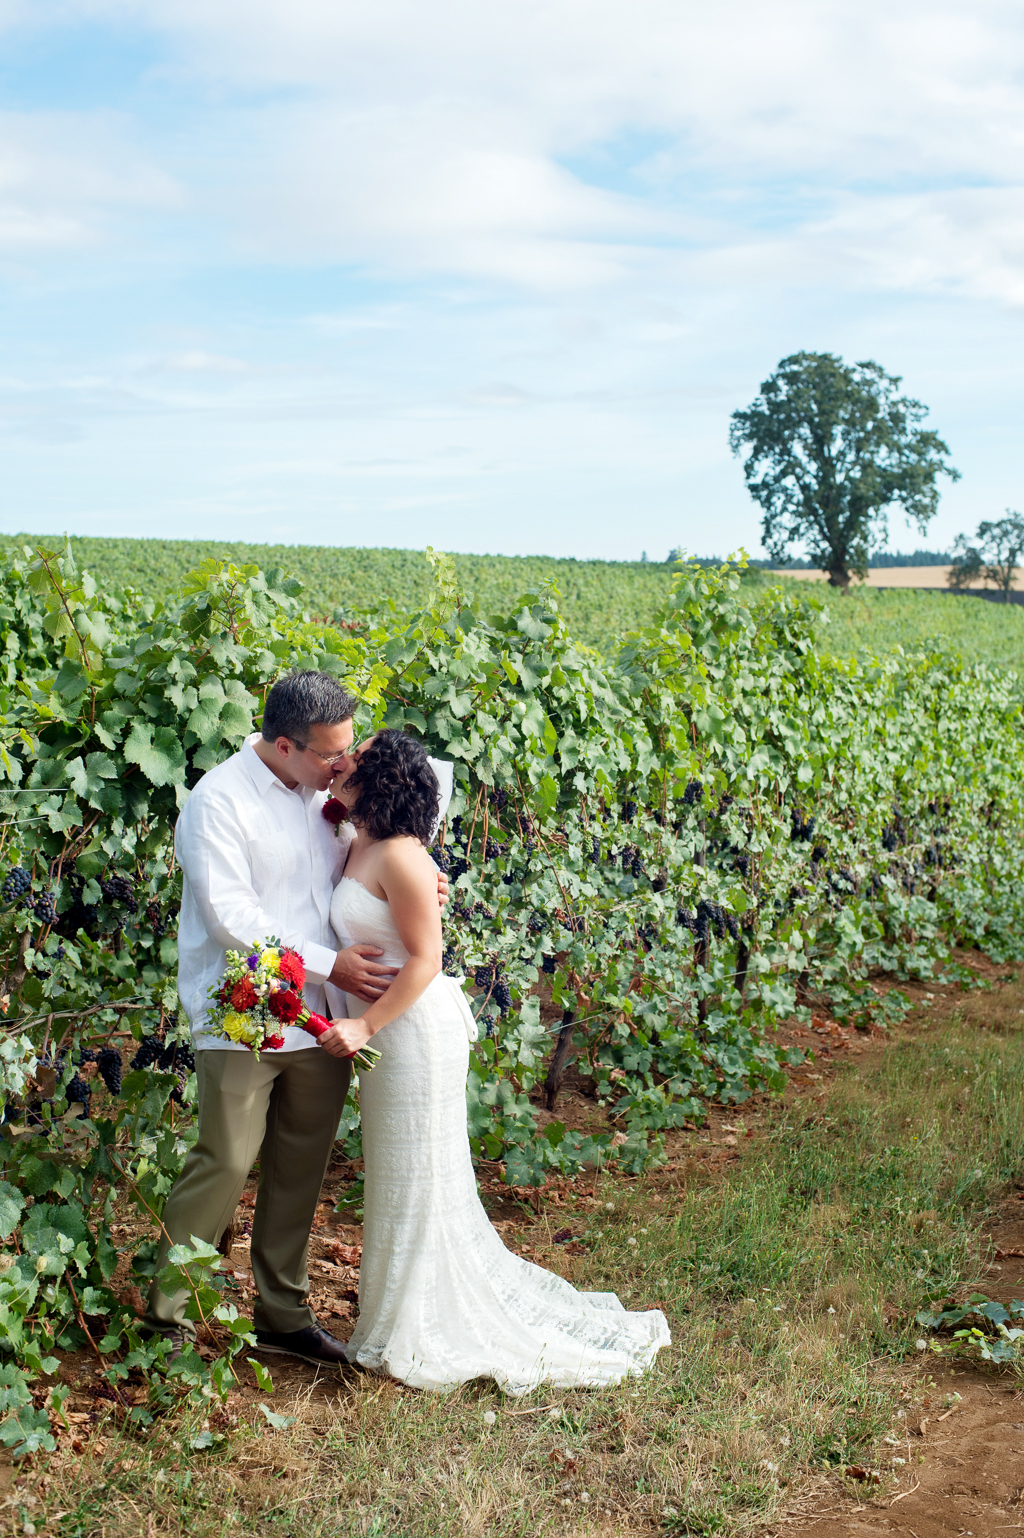 bride with vibrant yellow and red bouquet kisses her groom in a vineyard